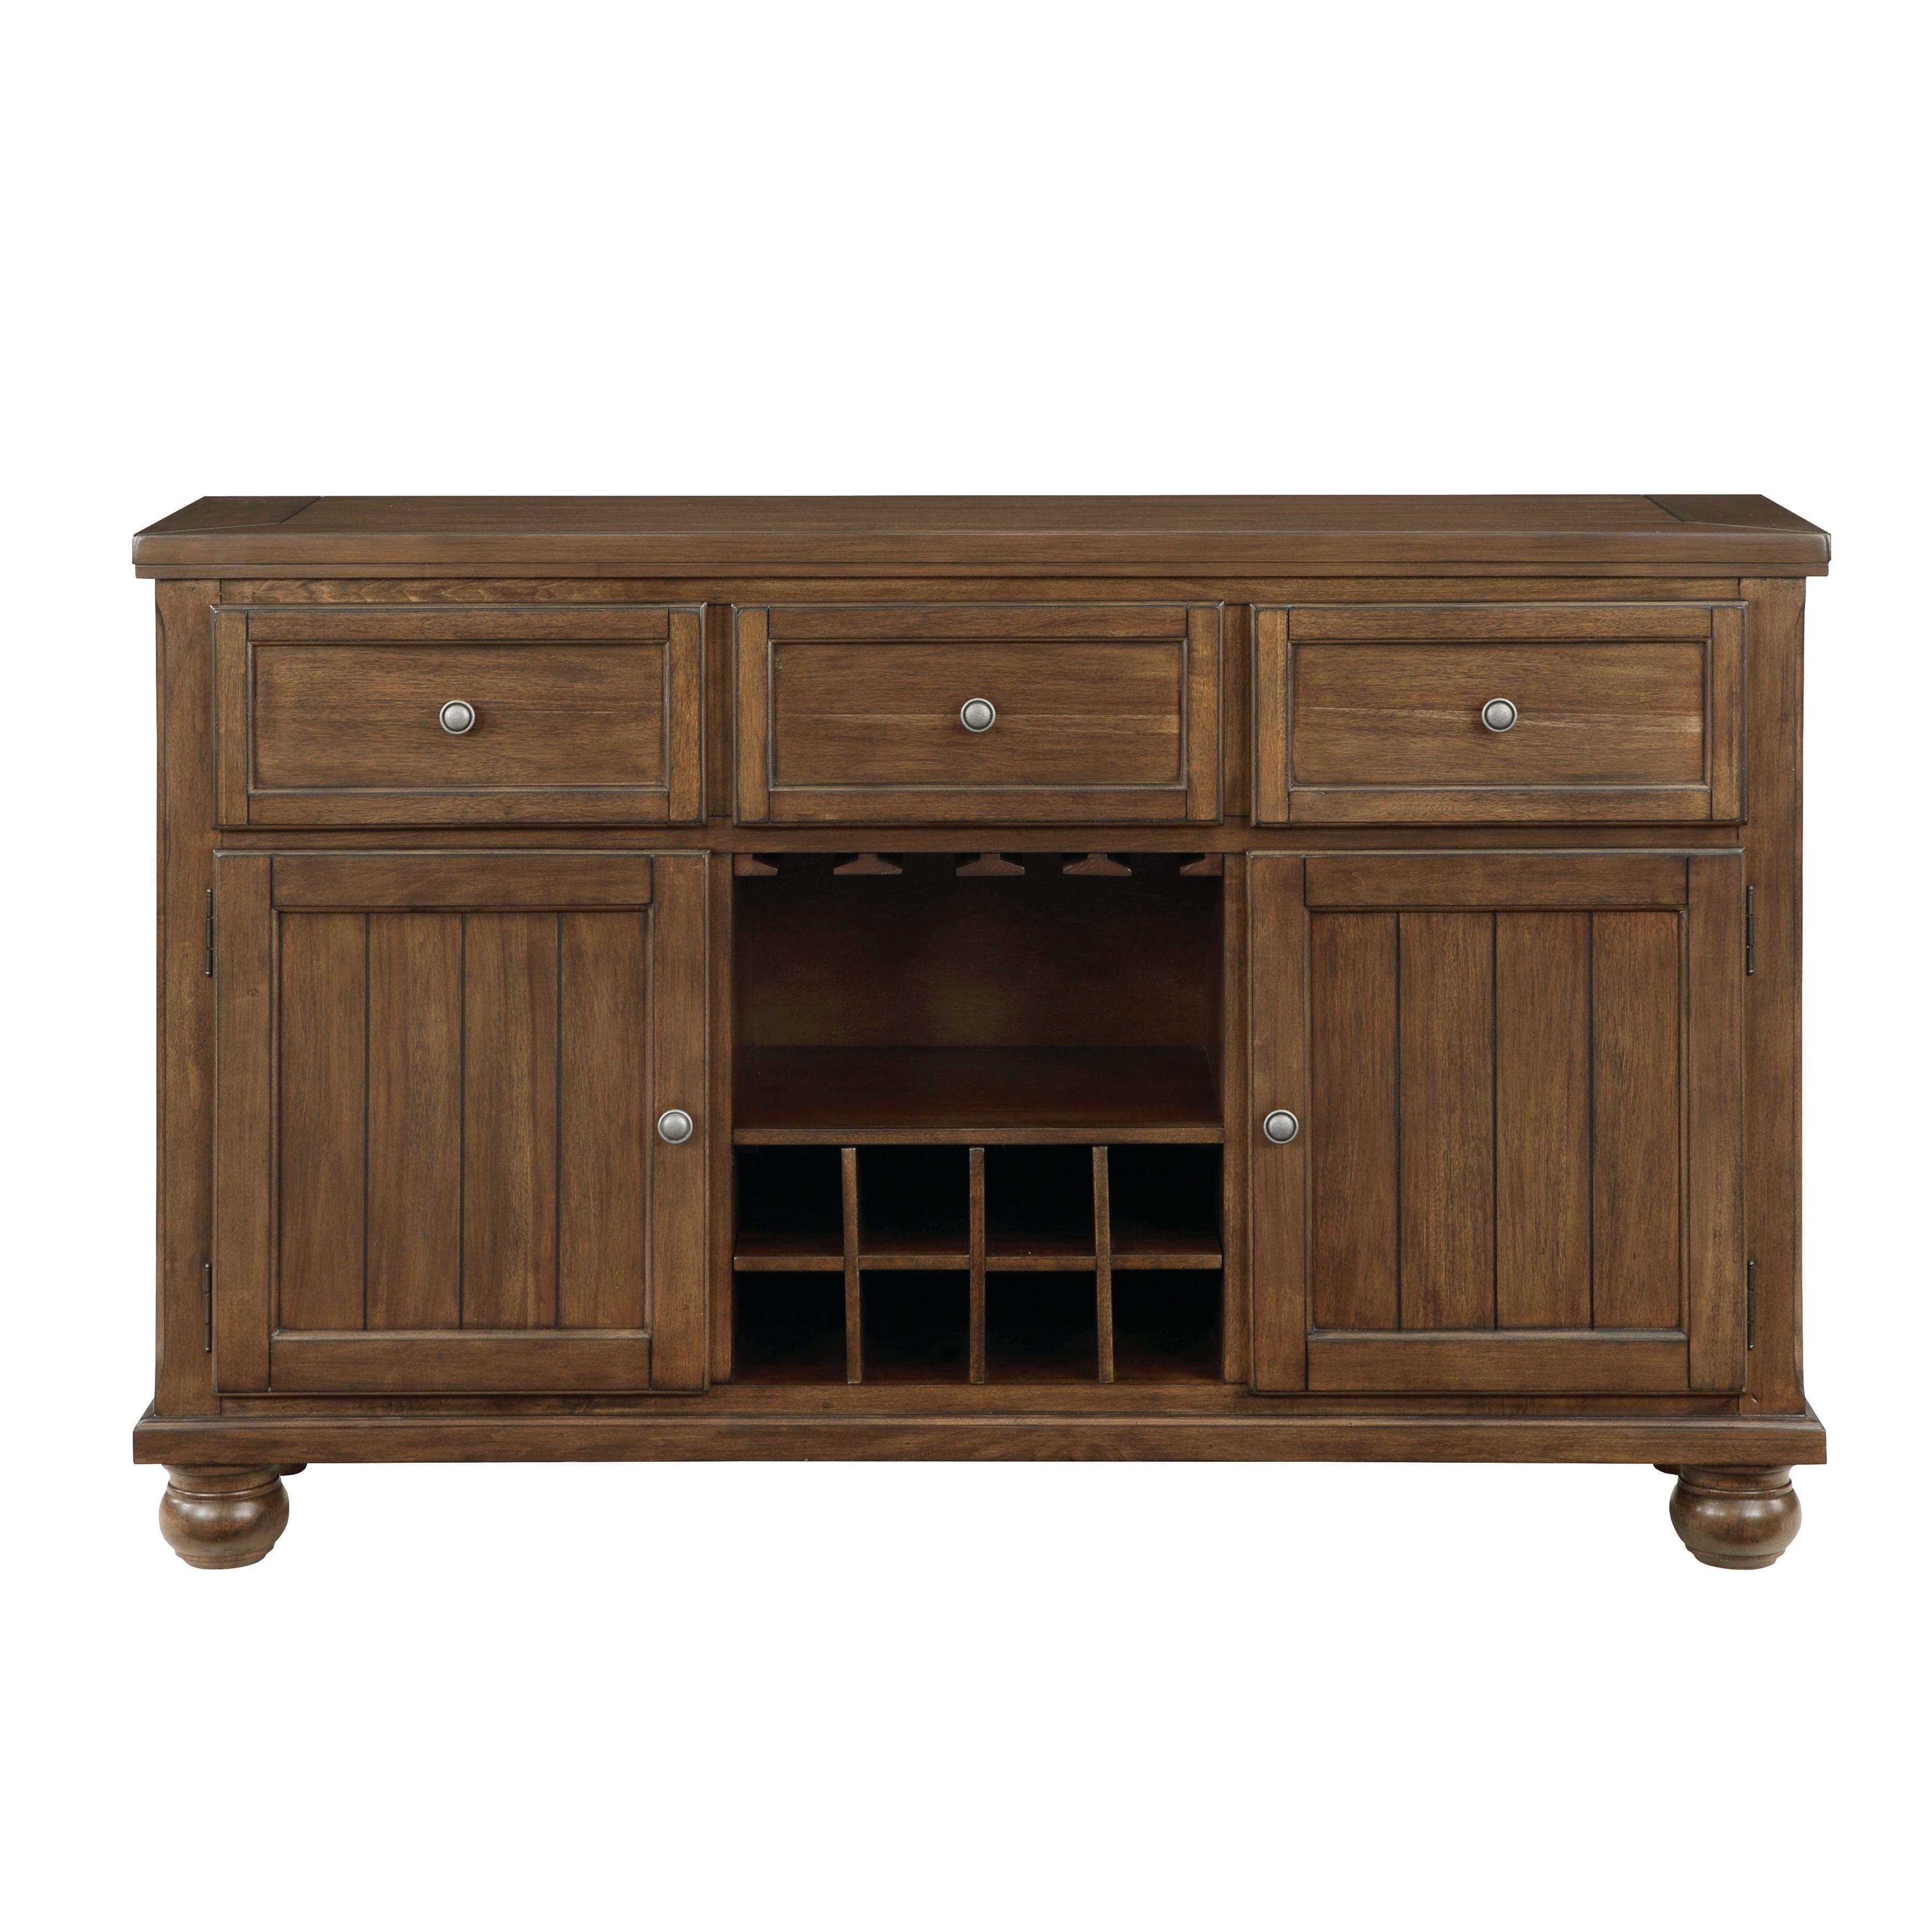 Traditional Server Tigard Collection Server 5761-40-S 5761-40-S in Cherry Finish 